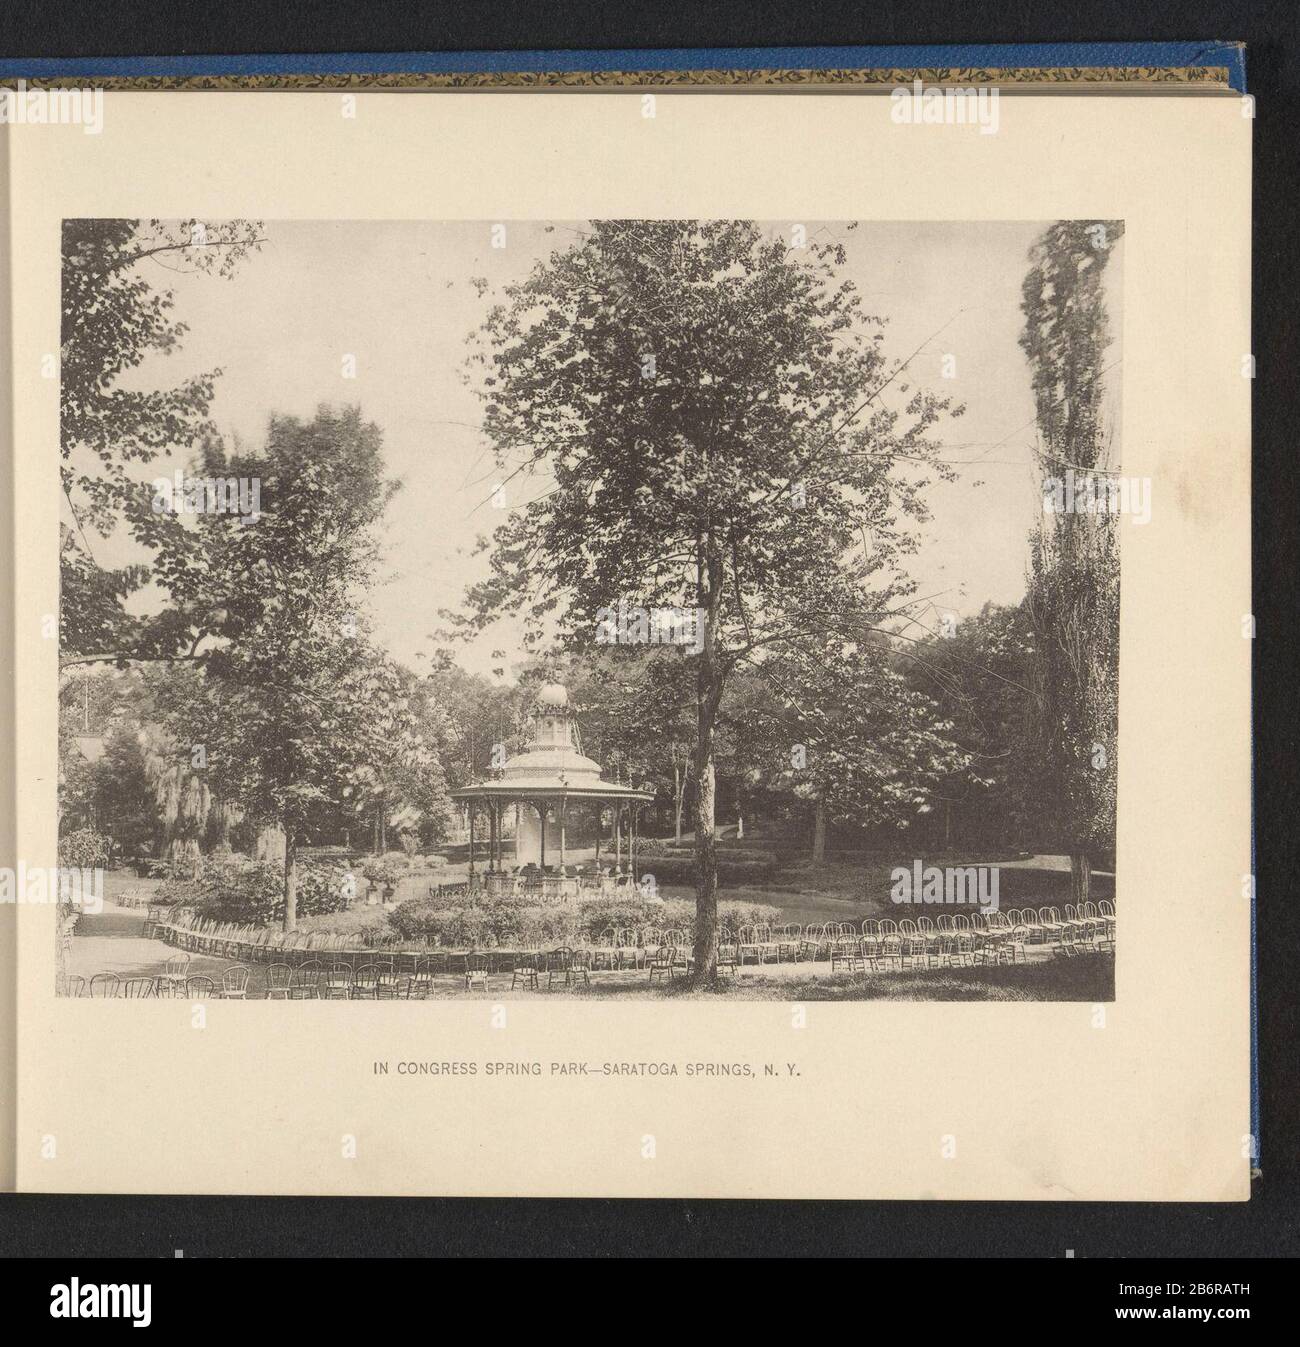 Gezicht op het Congress Springs Park in Saratoga In Congress Spring Park - Saratoga Springs, NY (titel op object) View of the Congress Springs Park in Spring SaratogaIn Congress Park - Saratoga Springs, NY (Title object) Object Type: photomechanical printing page Object number: RP-F-2001-7-996-10 Manufacturer : manufacturer: anonymous location manufacture: Saratoga Spring Dated: ca. 1883 - in or in front 1893 Material: paper Technique: light pressure dimensions: picture: h 140 mm × W 191 mm Subject: public gardens, park where: Saratoga Spring Stock Photo